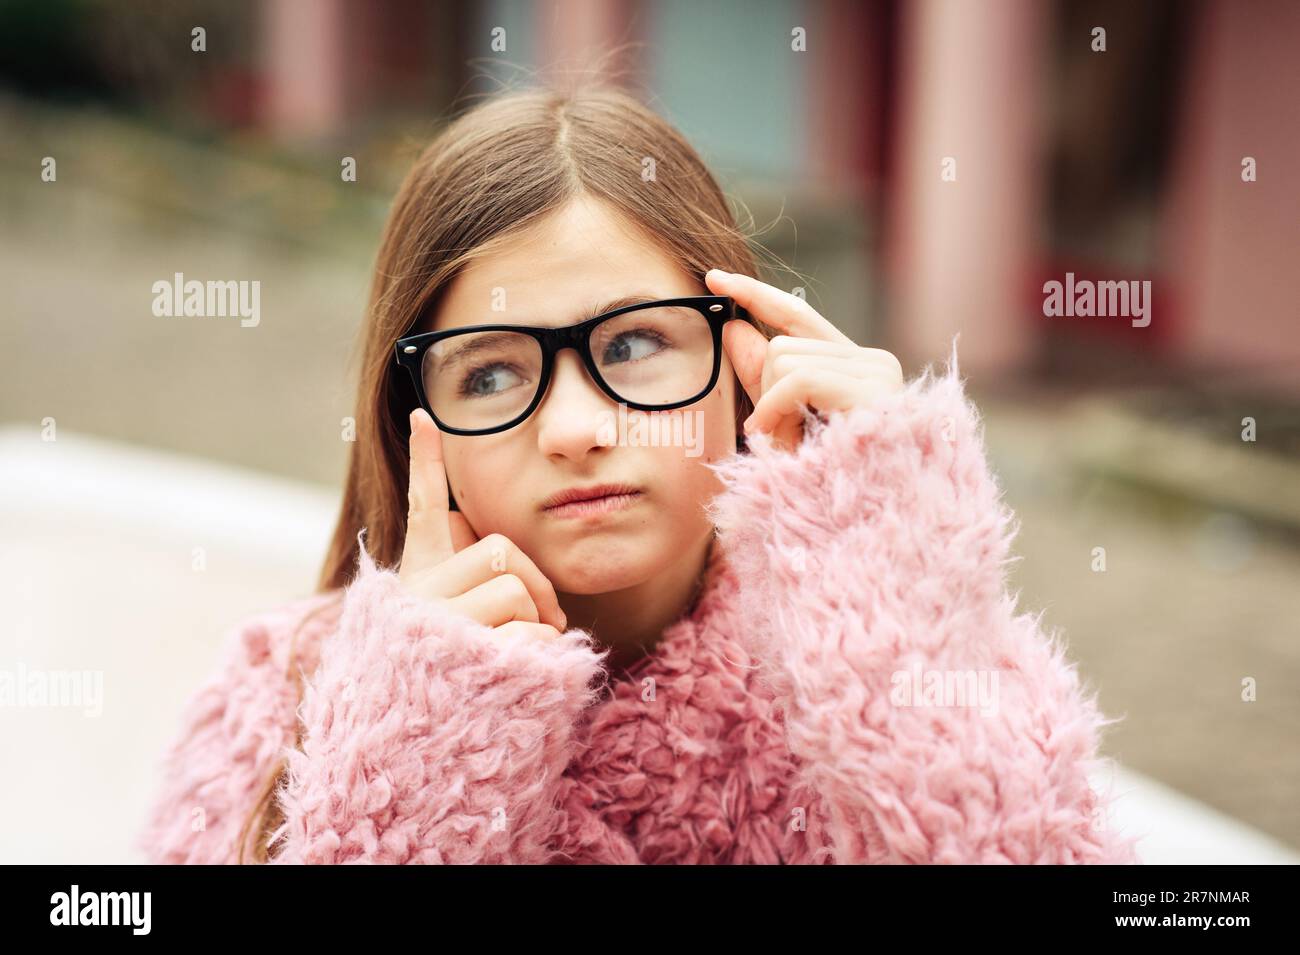 Outdoor portrait of cute young kid girl wearing eyeglasses and pink coat Stock Photo